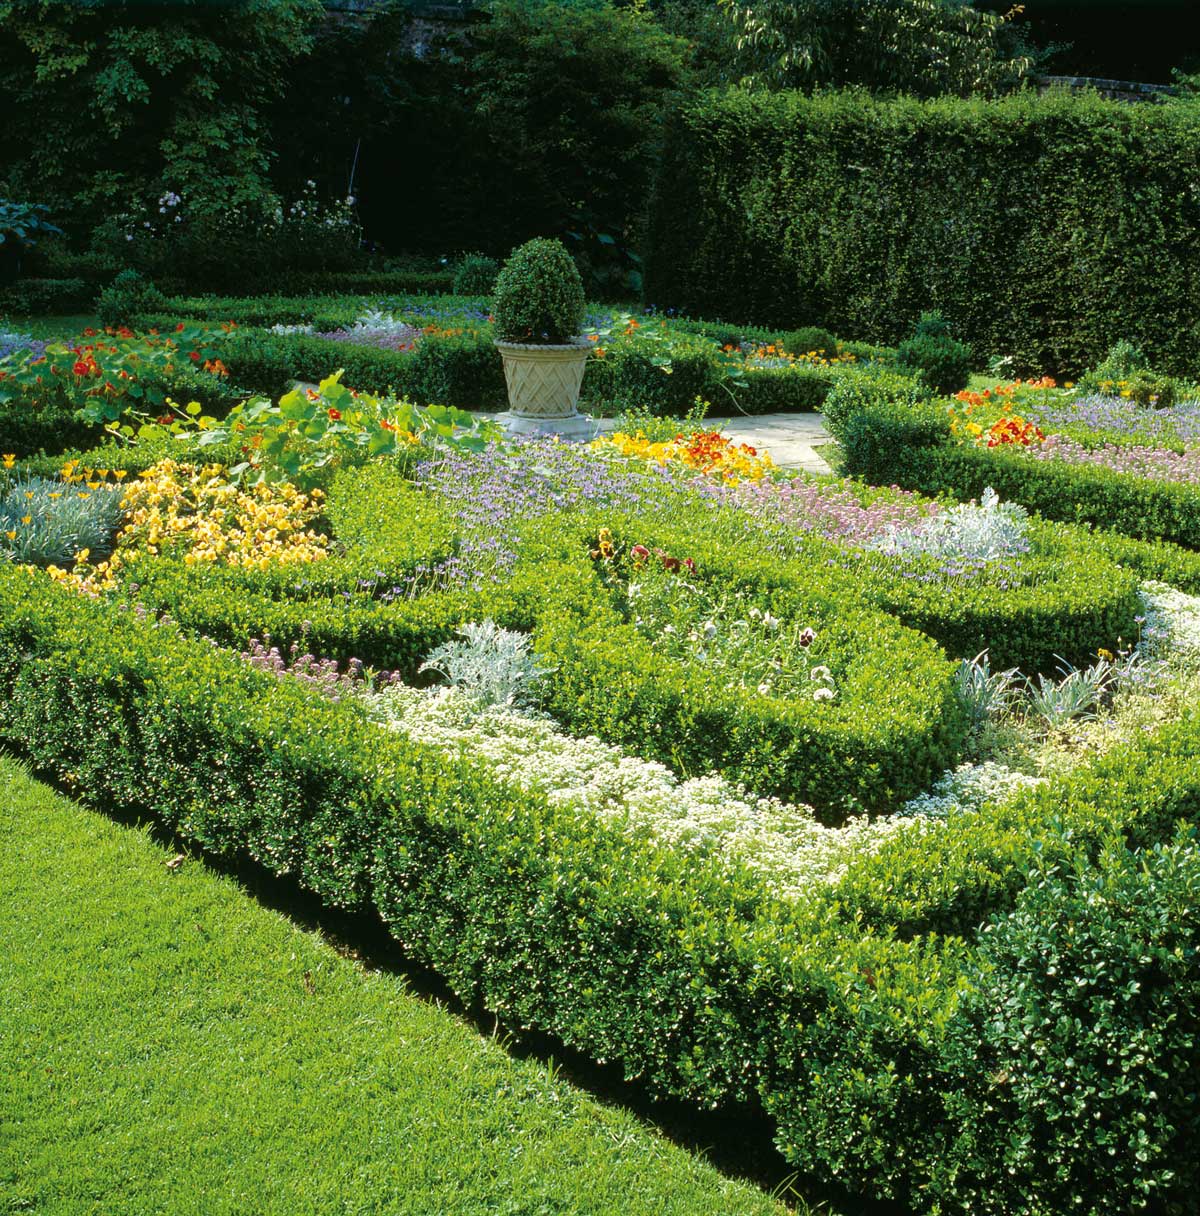 This Glasgow garden is packed with decorative topiaries and yellow and orange planting